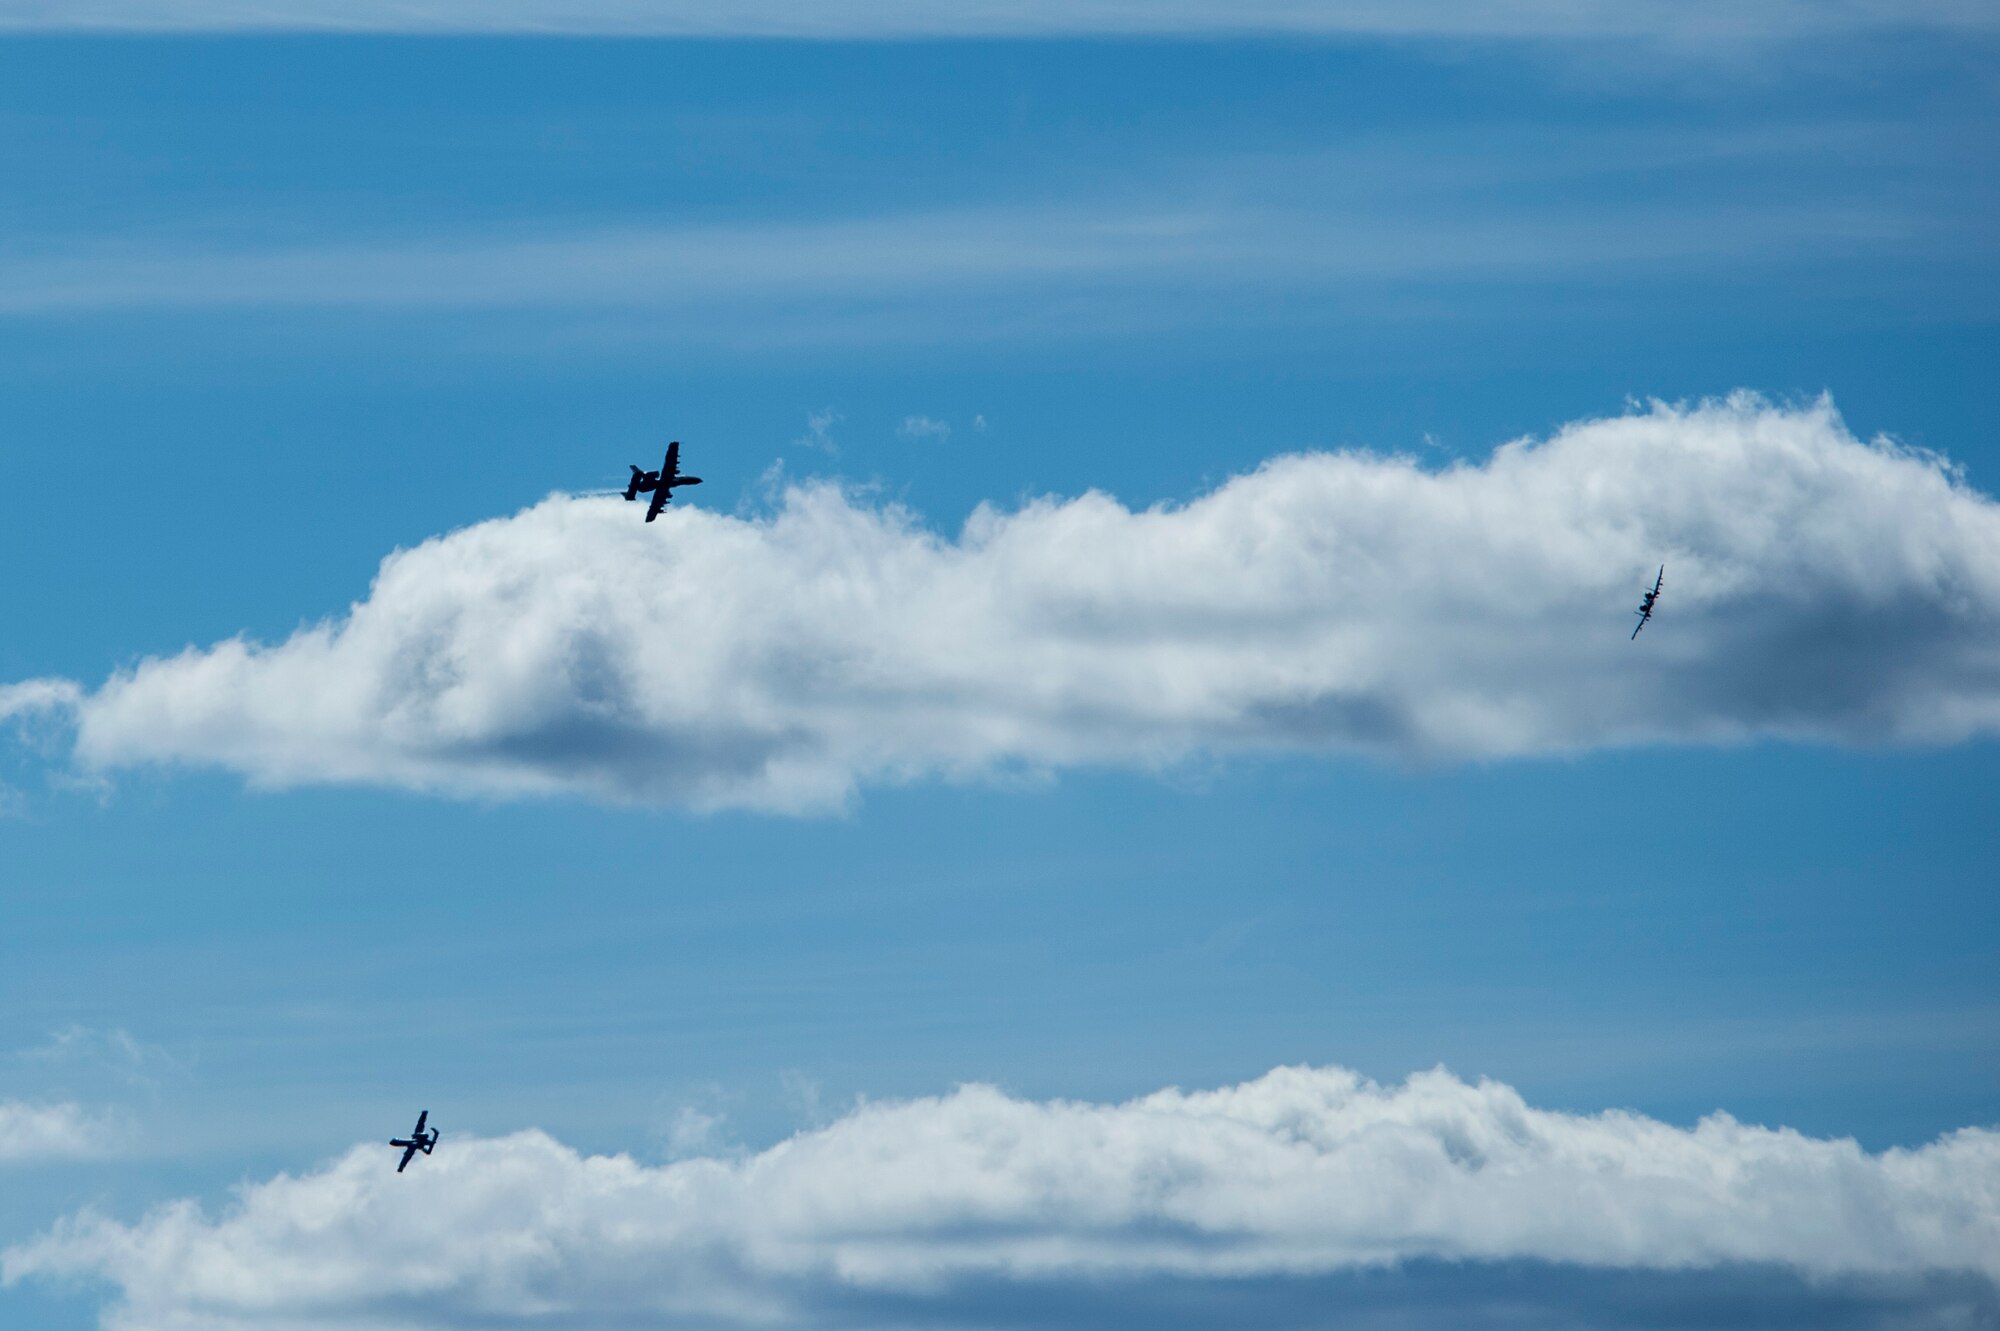 Three A-10 Thunderbolt II attack aircraft prepare to land at Ämari Air Base, Estonia, May 4, 2015. The U.S. values the shared commitment and close cooperation with NATO allies and partners on countering a range of regional and global threats. (U.S. Air Force photo by Senior Airman Rusty Frank/Released)